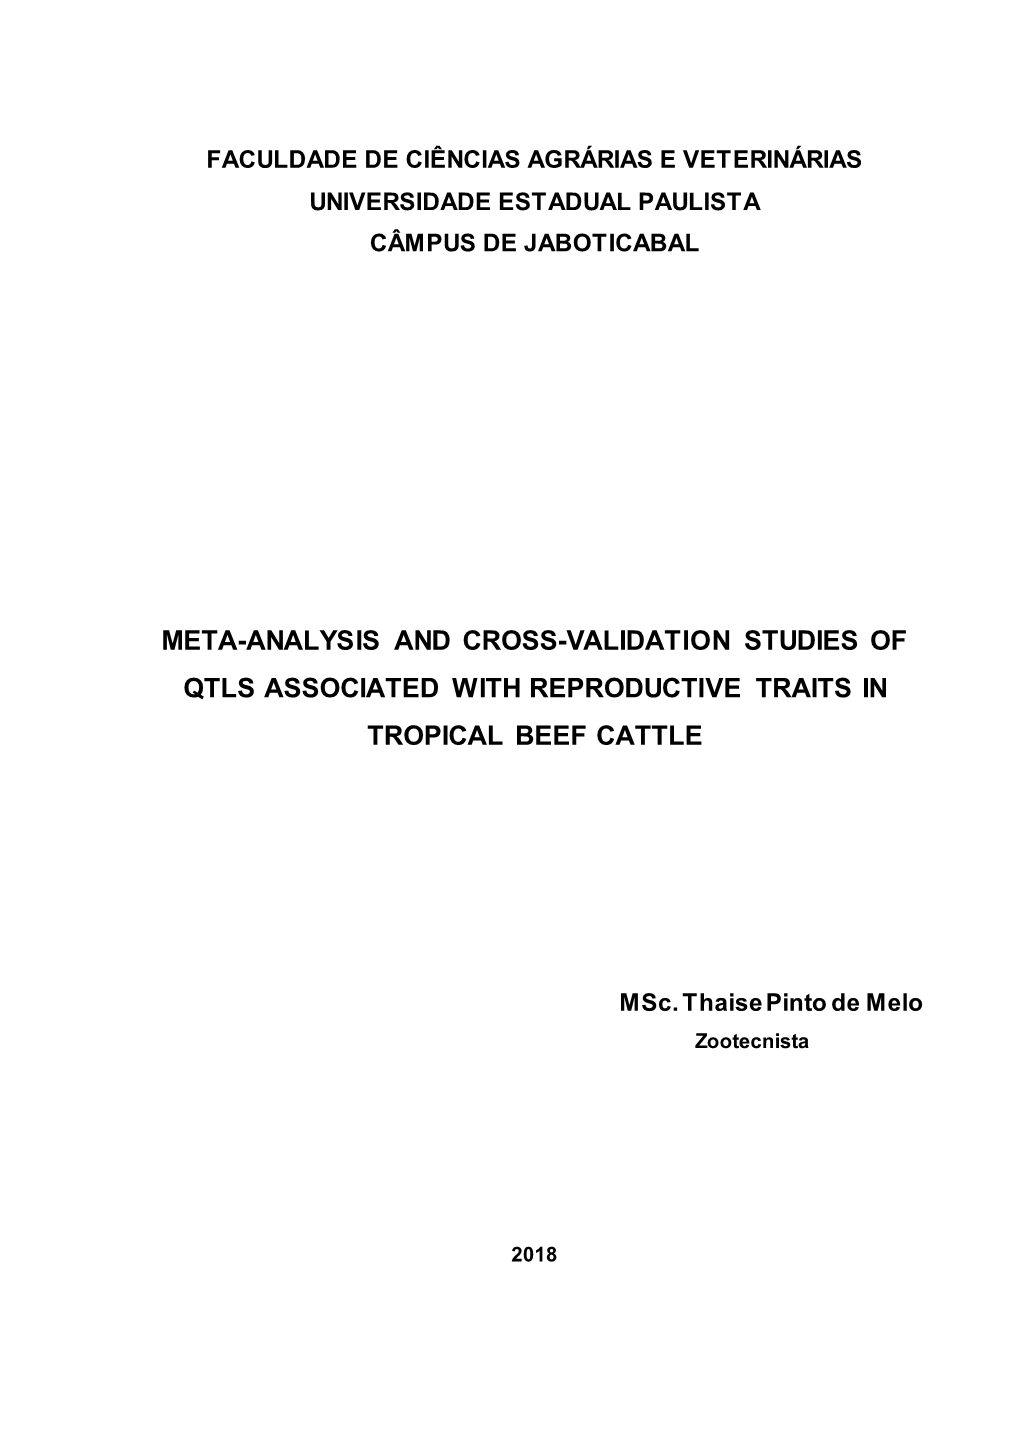 Meta-Analysis and Cross-Validation Studies of Qtls Associated with Reproductive Traits in Tropical Beef Cattle